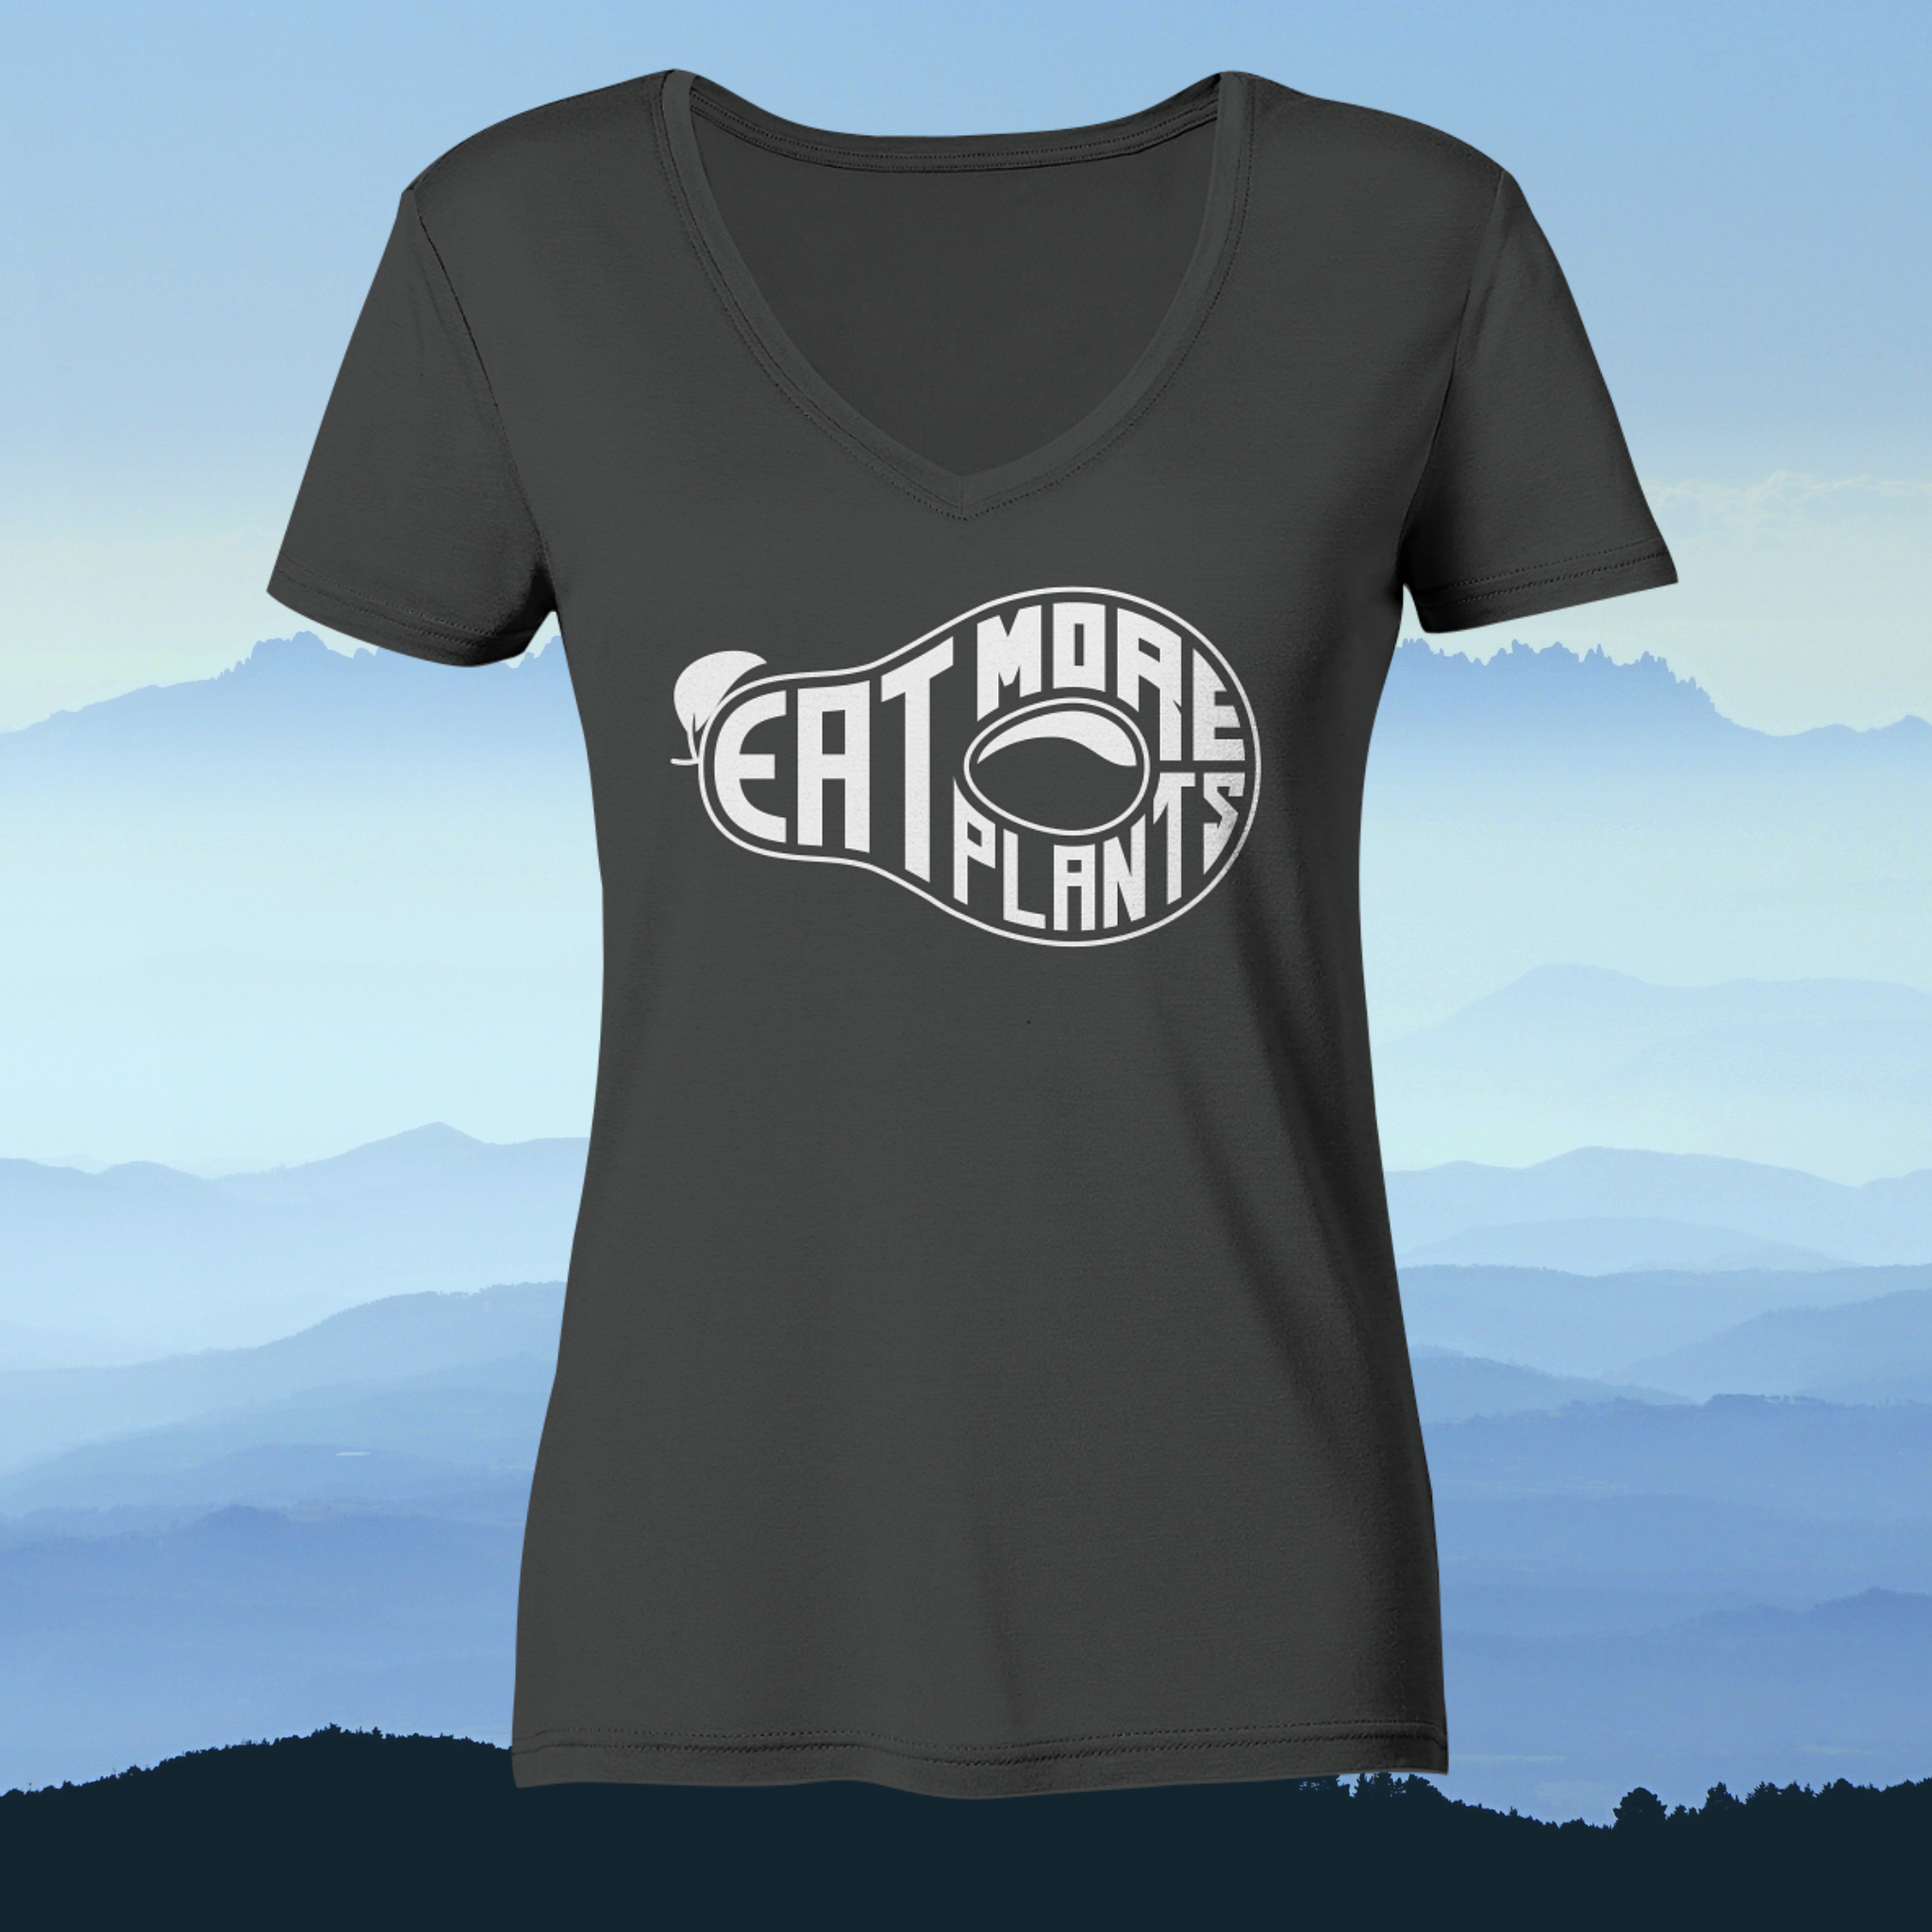 Organic ladies' v-neck vegan tshirt in grey saying eat more plants on a foggy mountain background